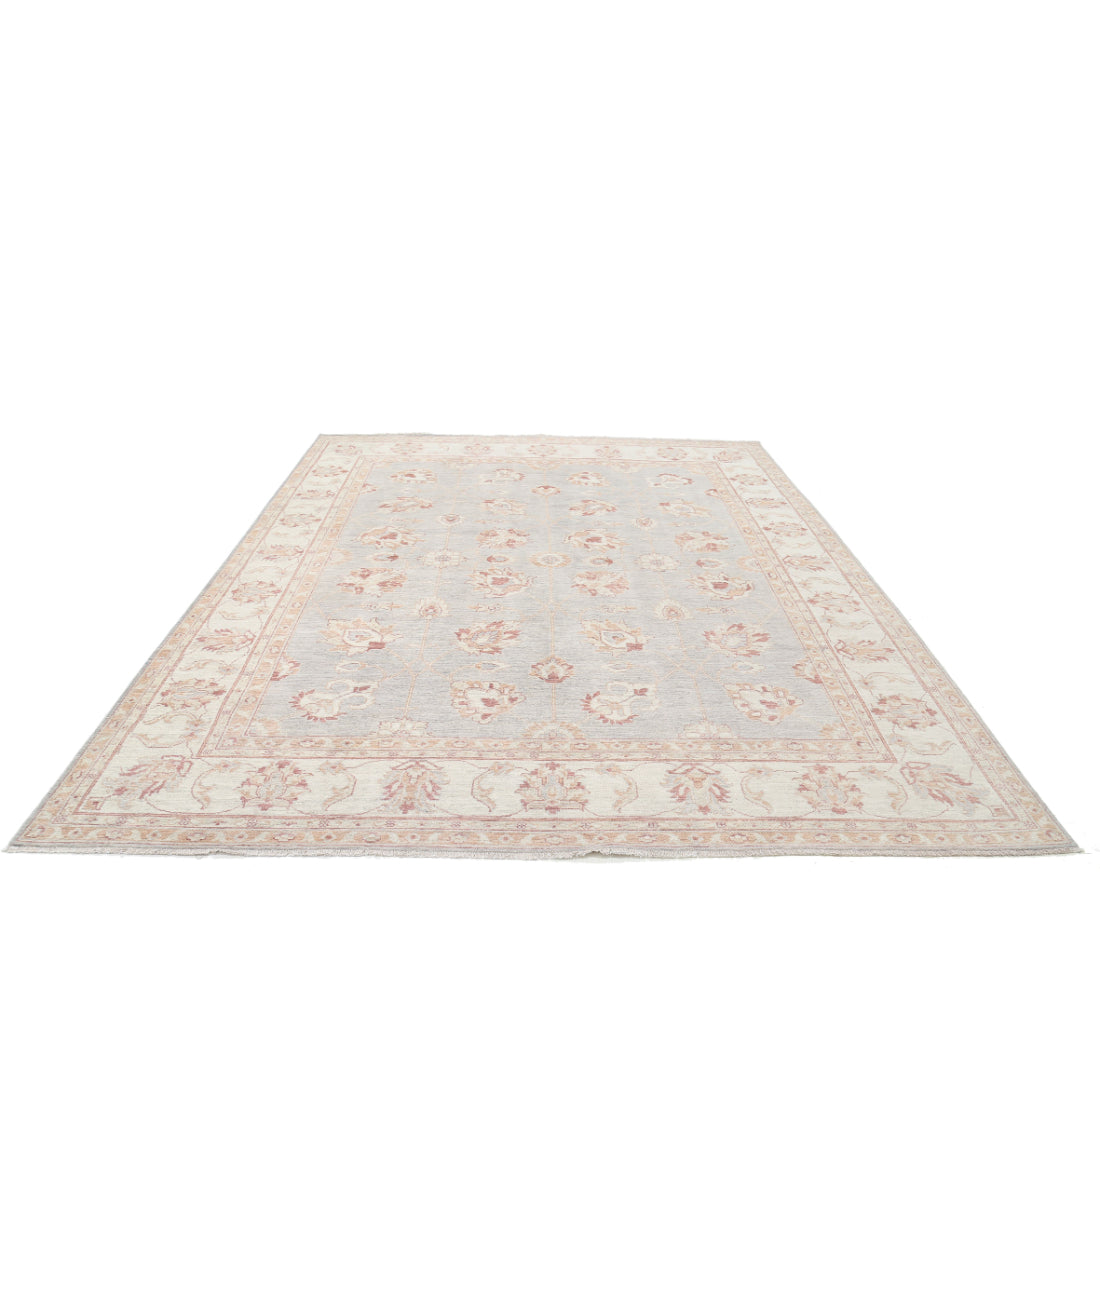 Hand Knotted Serenity Wool Rug - 8'9'' x 11'6'' 8'9'' x 11'6'' (263 X 345) / Grey / Ivory